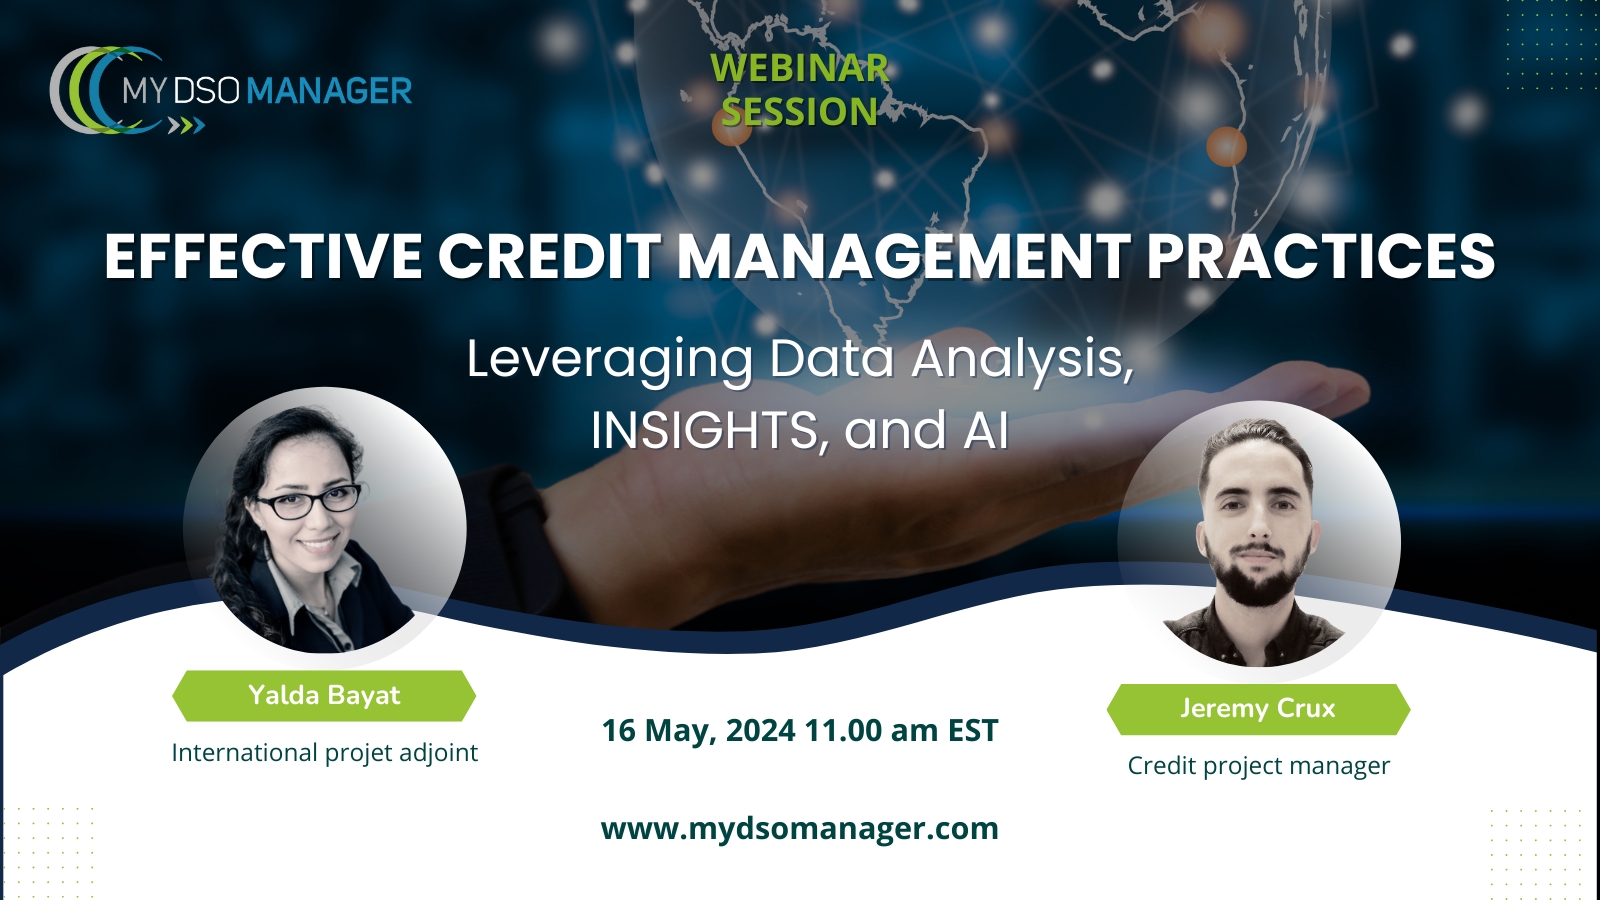 Leveraging data analysis, functionality of Insights and AI for best practices in Credit Management